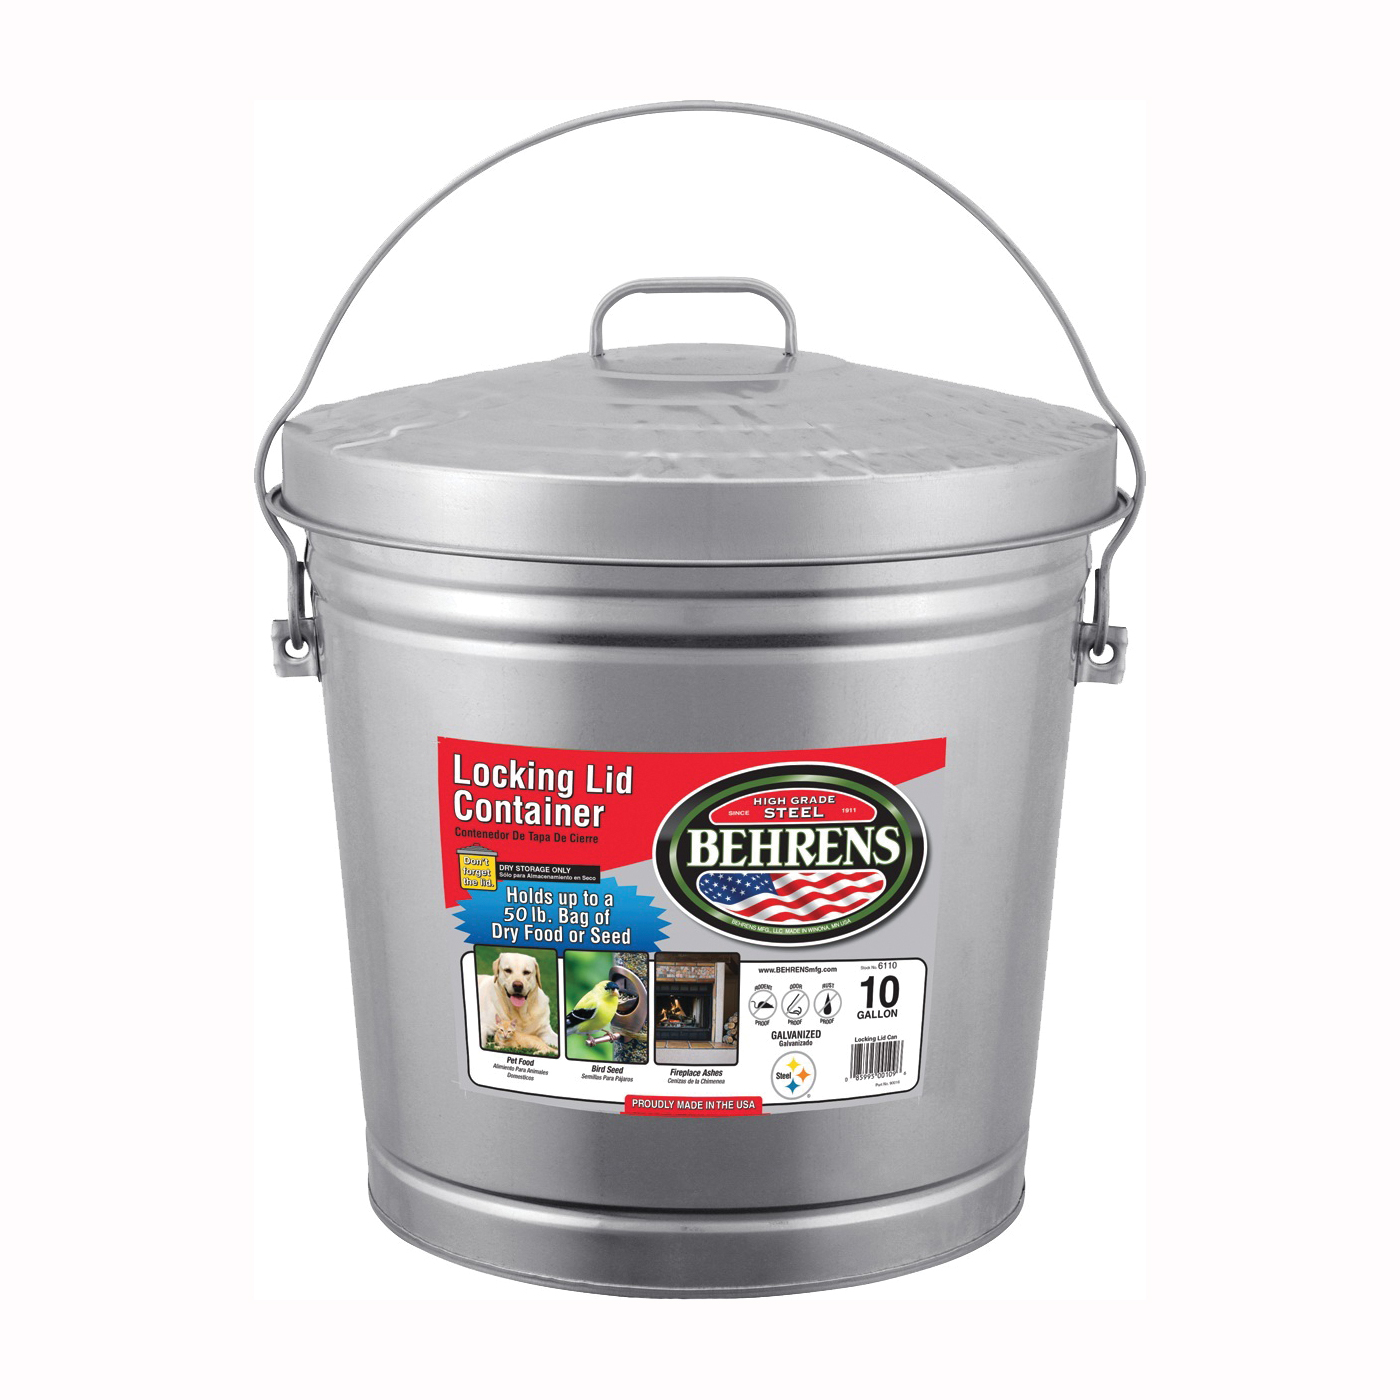 6110 Locking Lid Can, 10 gal Capacity, Galvanized Steel, Silver